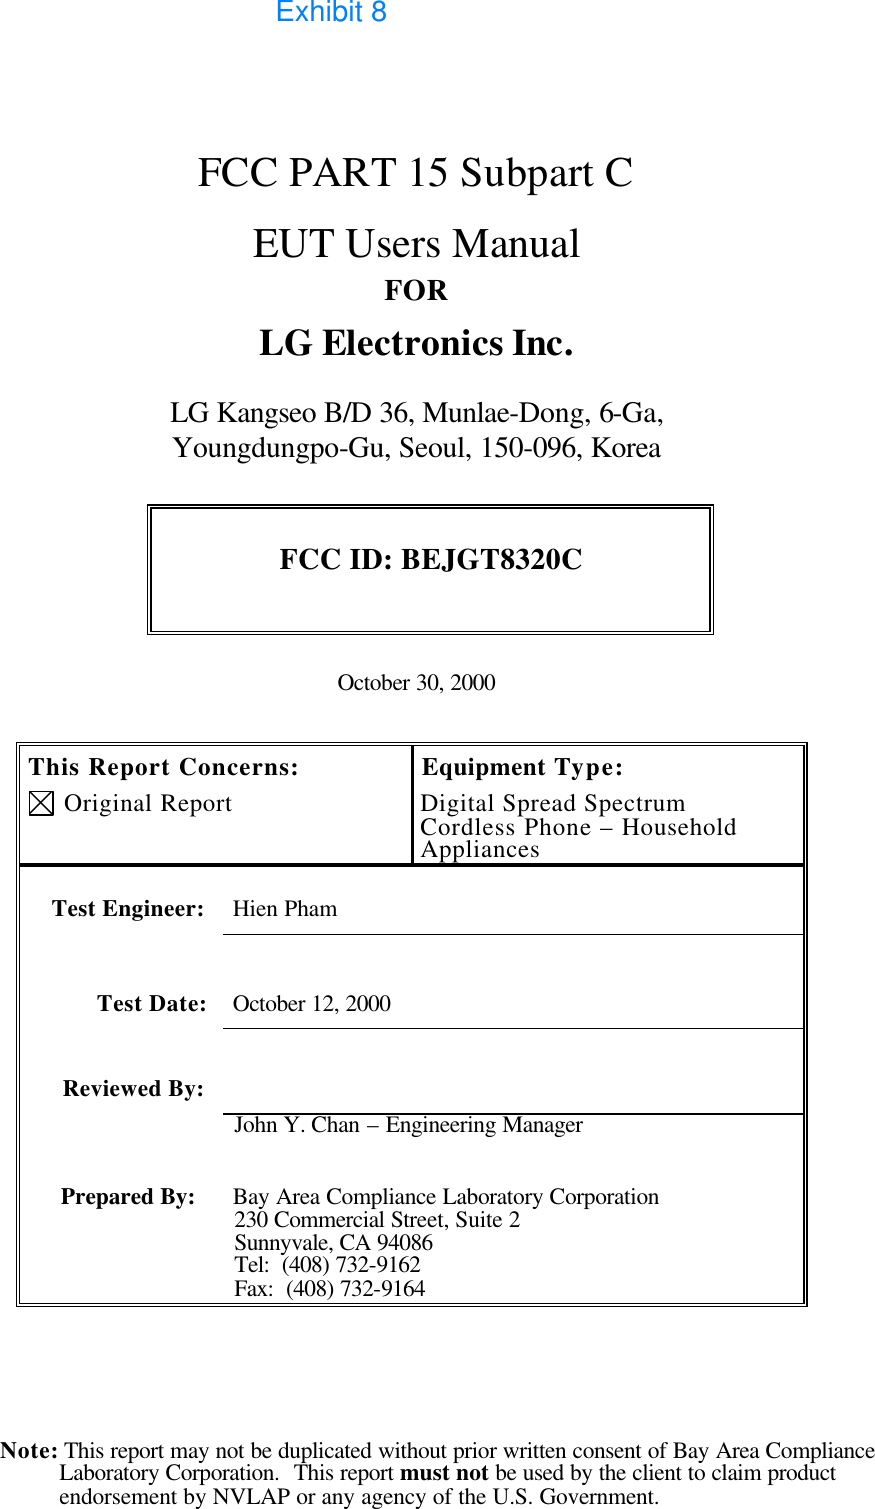  Note: This report may not be duplicated without prior written consent of Bay Area Compliance Laboratory Corporation.  This report must not be used by the client to claim product endorsement by NVLAP or any agency of the U.S. Government.    FCC PART 15 Subpart C   EUT Users Manual FOR LG Electronics Inc.  LG Kangseo B/D 36, Munlae-Dong, 6-Ga,  Youngdungpo-Gu, Seoul, 150-096, Korea  FCC ID: BEJGT8320C   October 30, 2000   This Report Concerns:  Original Report Equipment Type: Digital Spread Spectrum Cordless Phone – Household Appliances    Test Engineer: Hien Pham   Test Date: October 12, 2000   Reviewed By:   John Y. Chan – Engineering Manager Prepared By: Bay Area Compliance Laboratory Corporation 230 Commercial Street, Suite 2 Sunnyvale, CA 94086 Tel:  (408) 732-9162 Fax:  (408) 732-9164   Exhibit 8